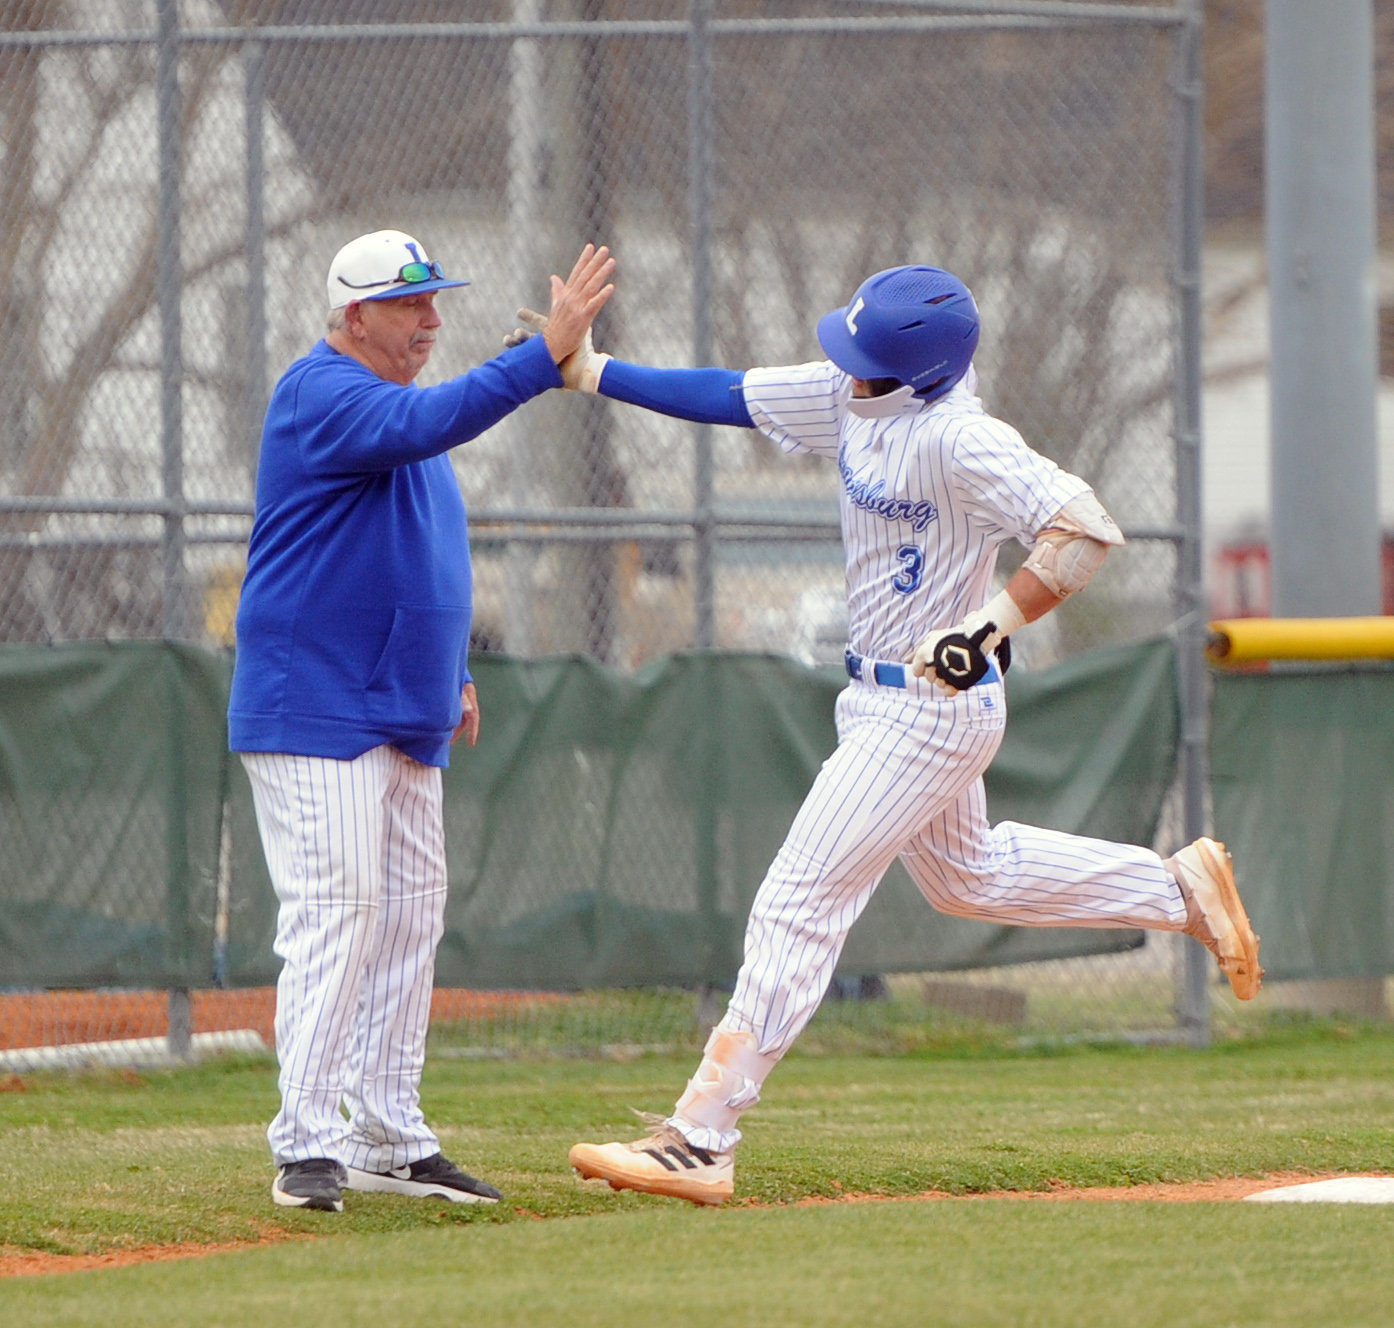 Tristan Griggs catches a high five from coach Mike “Monk” Reese  as he rounds third base after mashing a two-run homer to start the Tigers off on Tuesday afternoon.